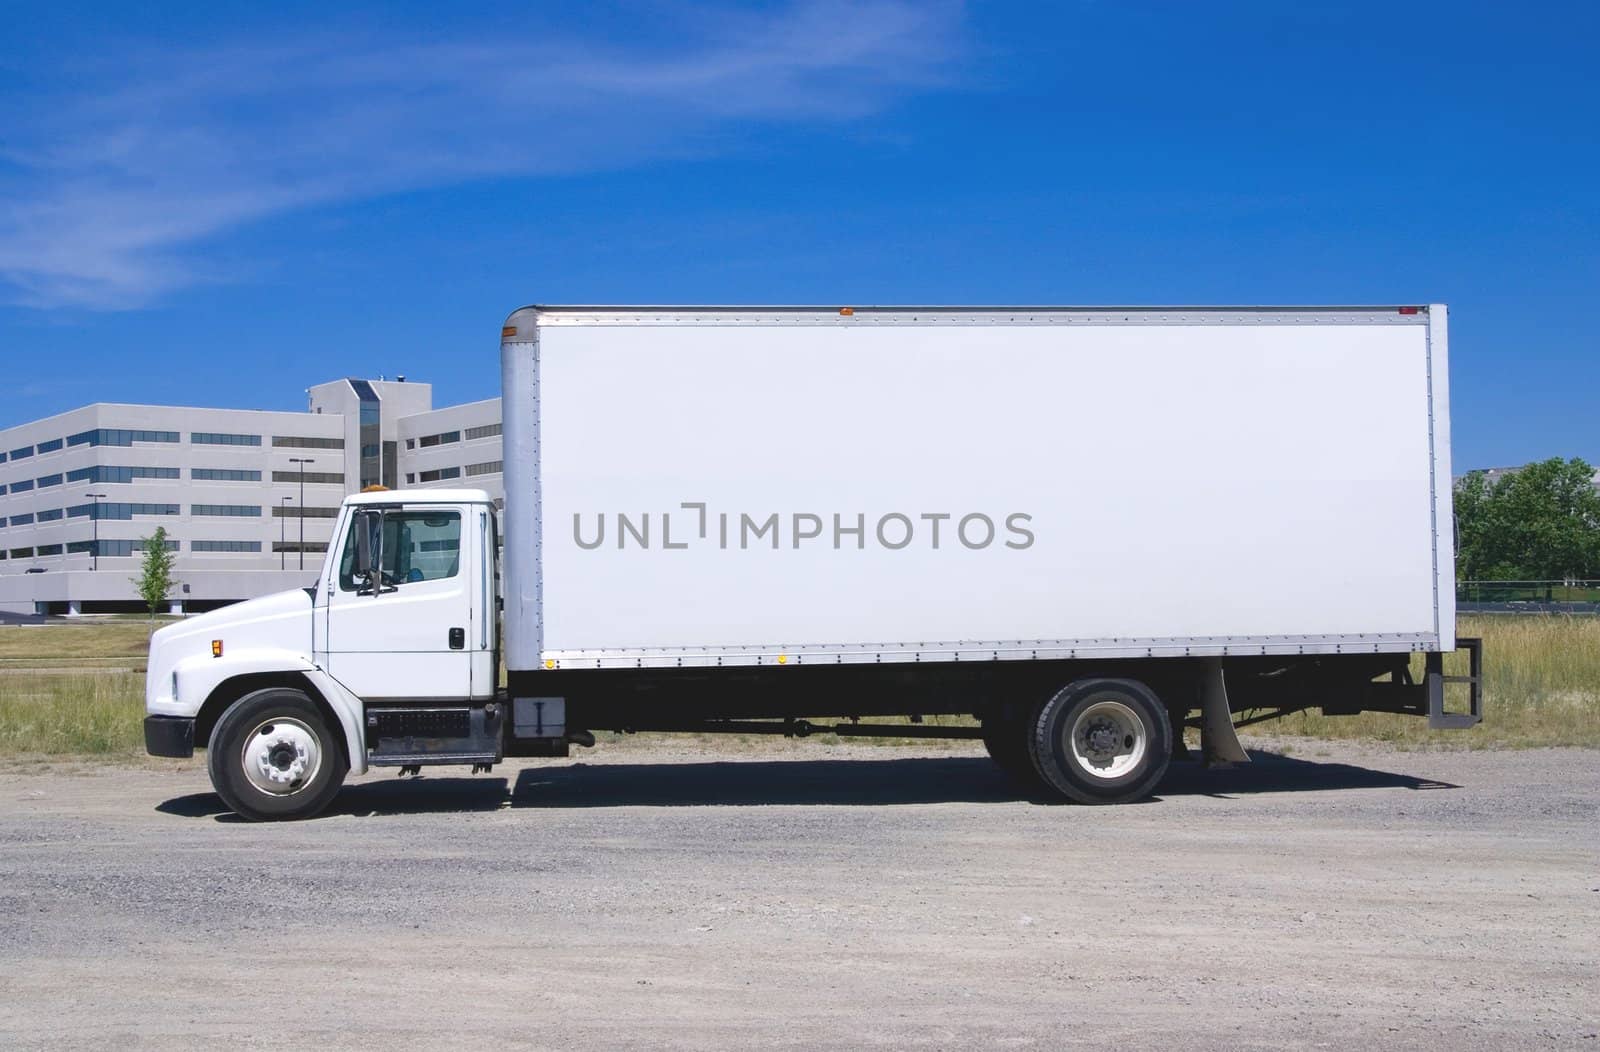 This is a picture of a typical six wheel city delivery cargo vehicle with a blank white van box.